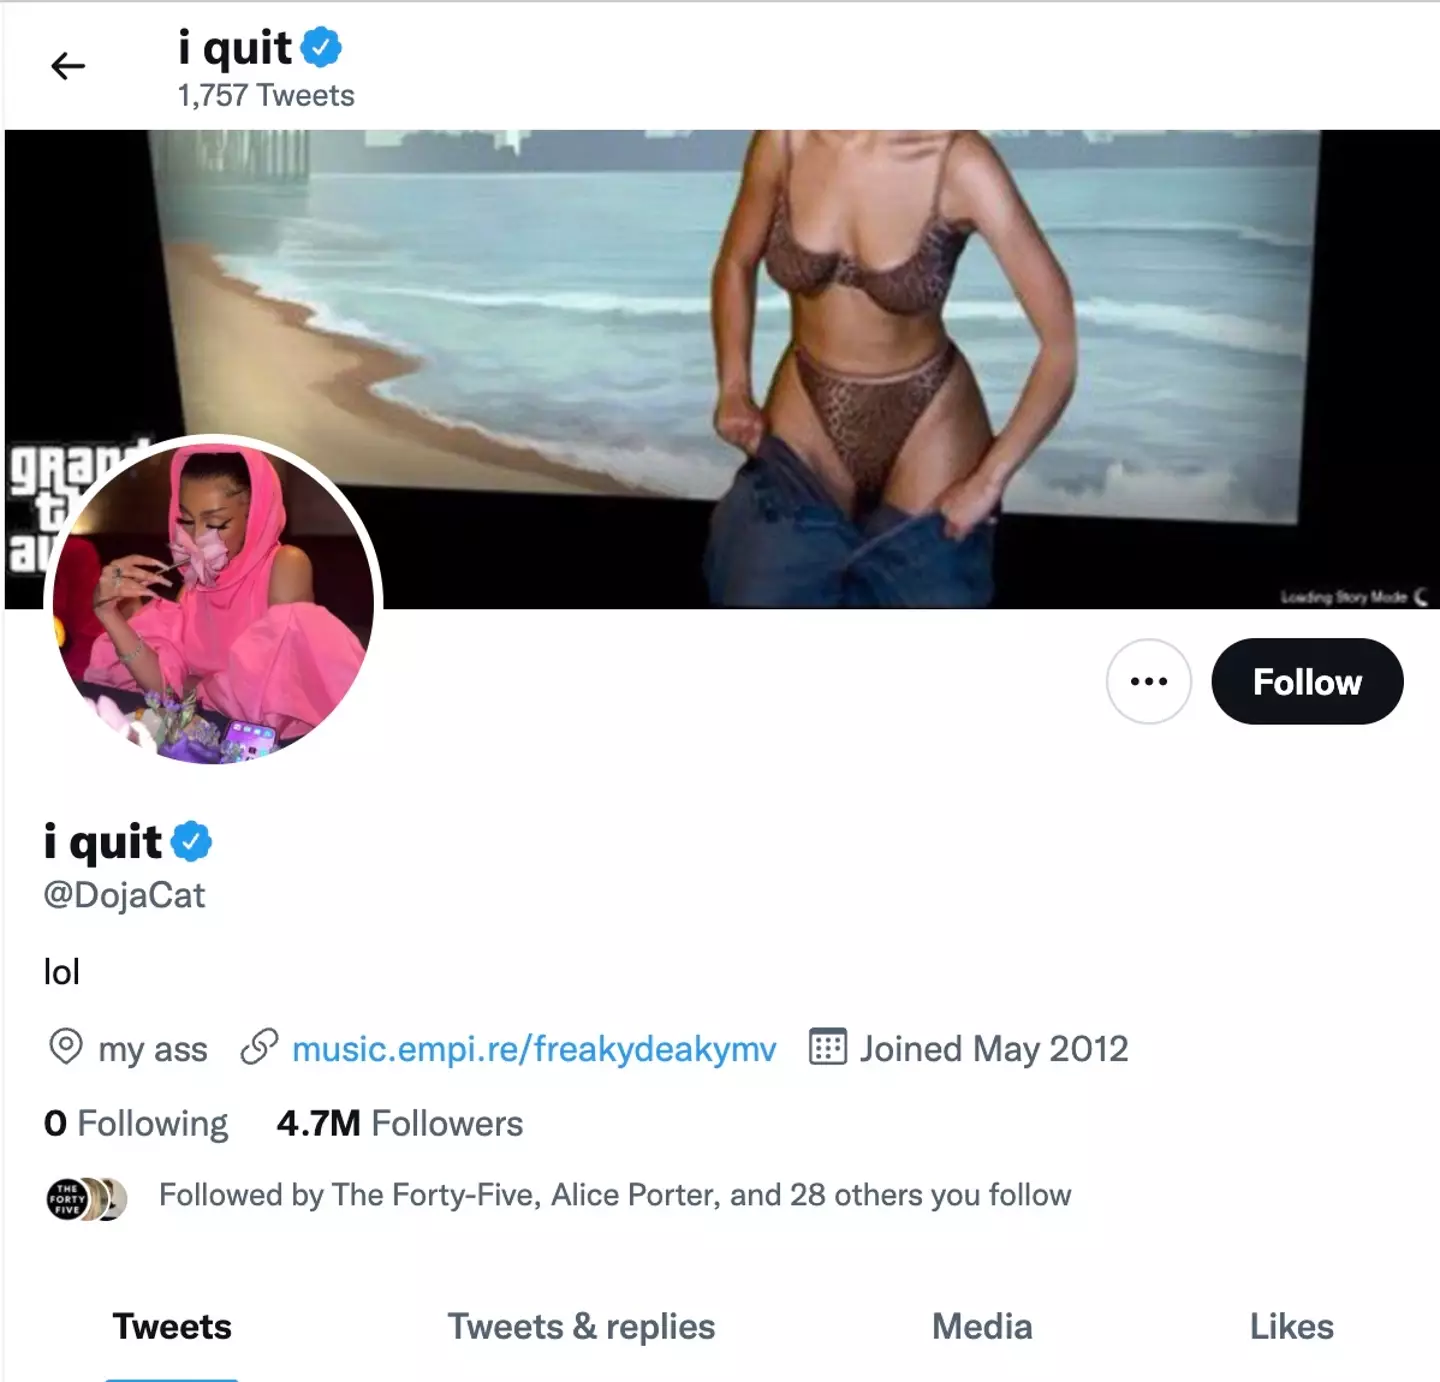 However, after replying to more tweets from like-minded fans, Doja Cat changed her name on Twitter to: “I quit" (Twitter Doja Cat)